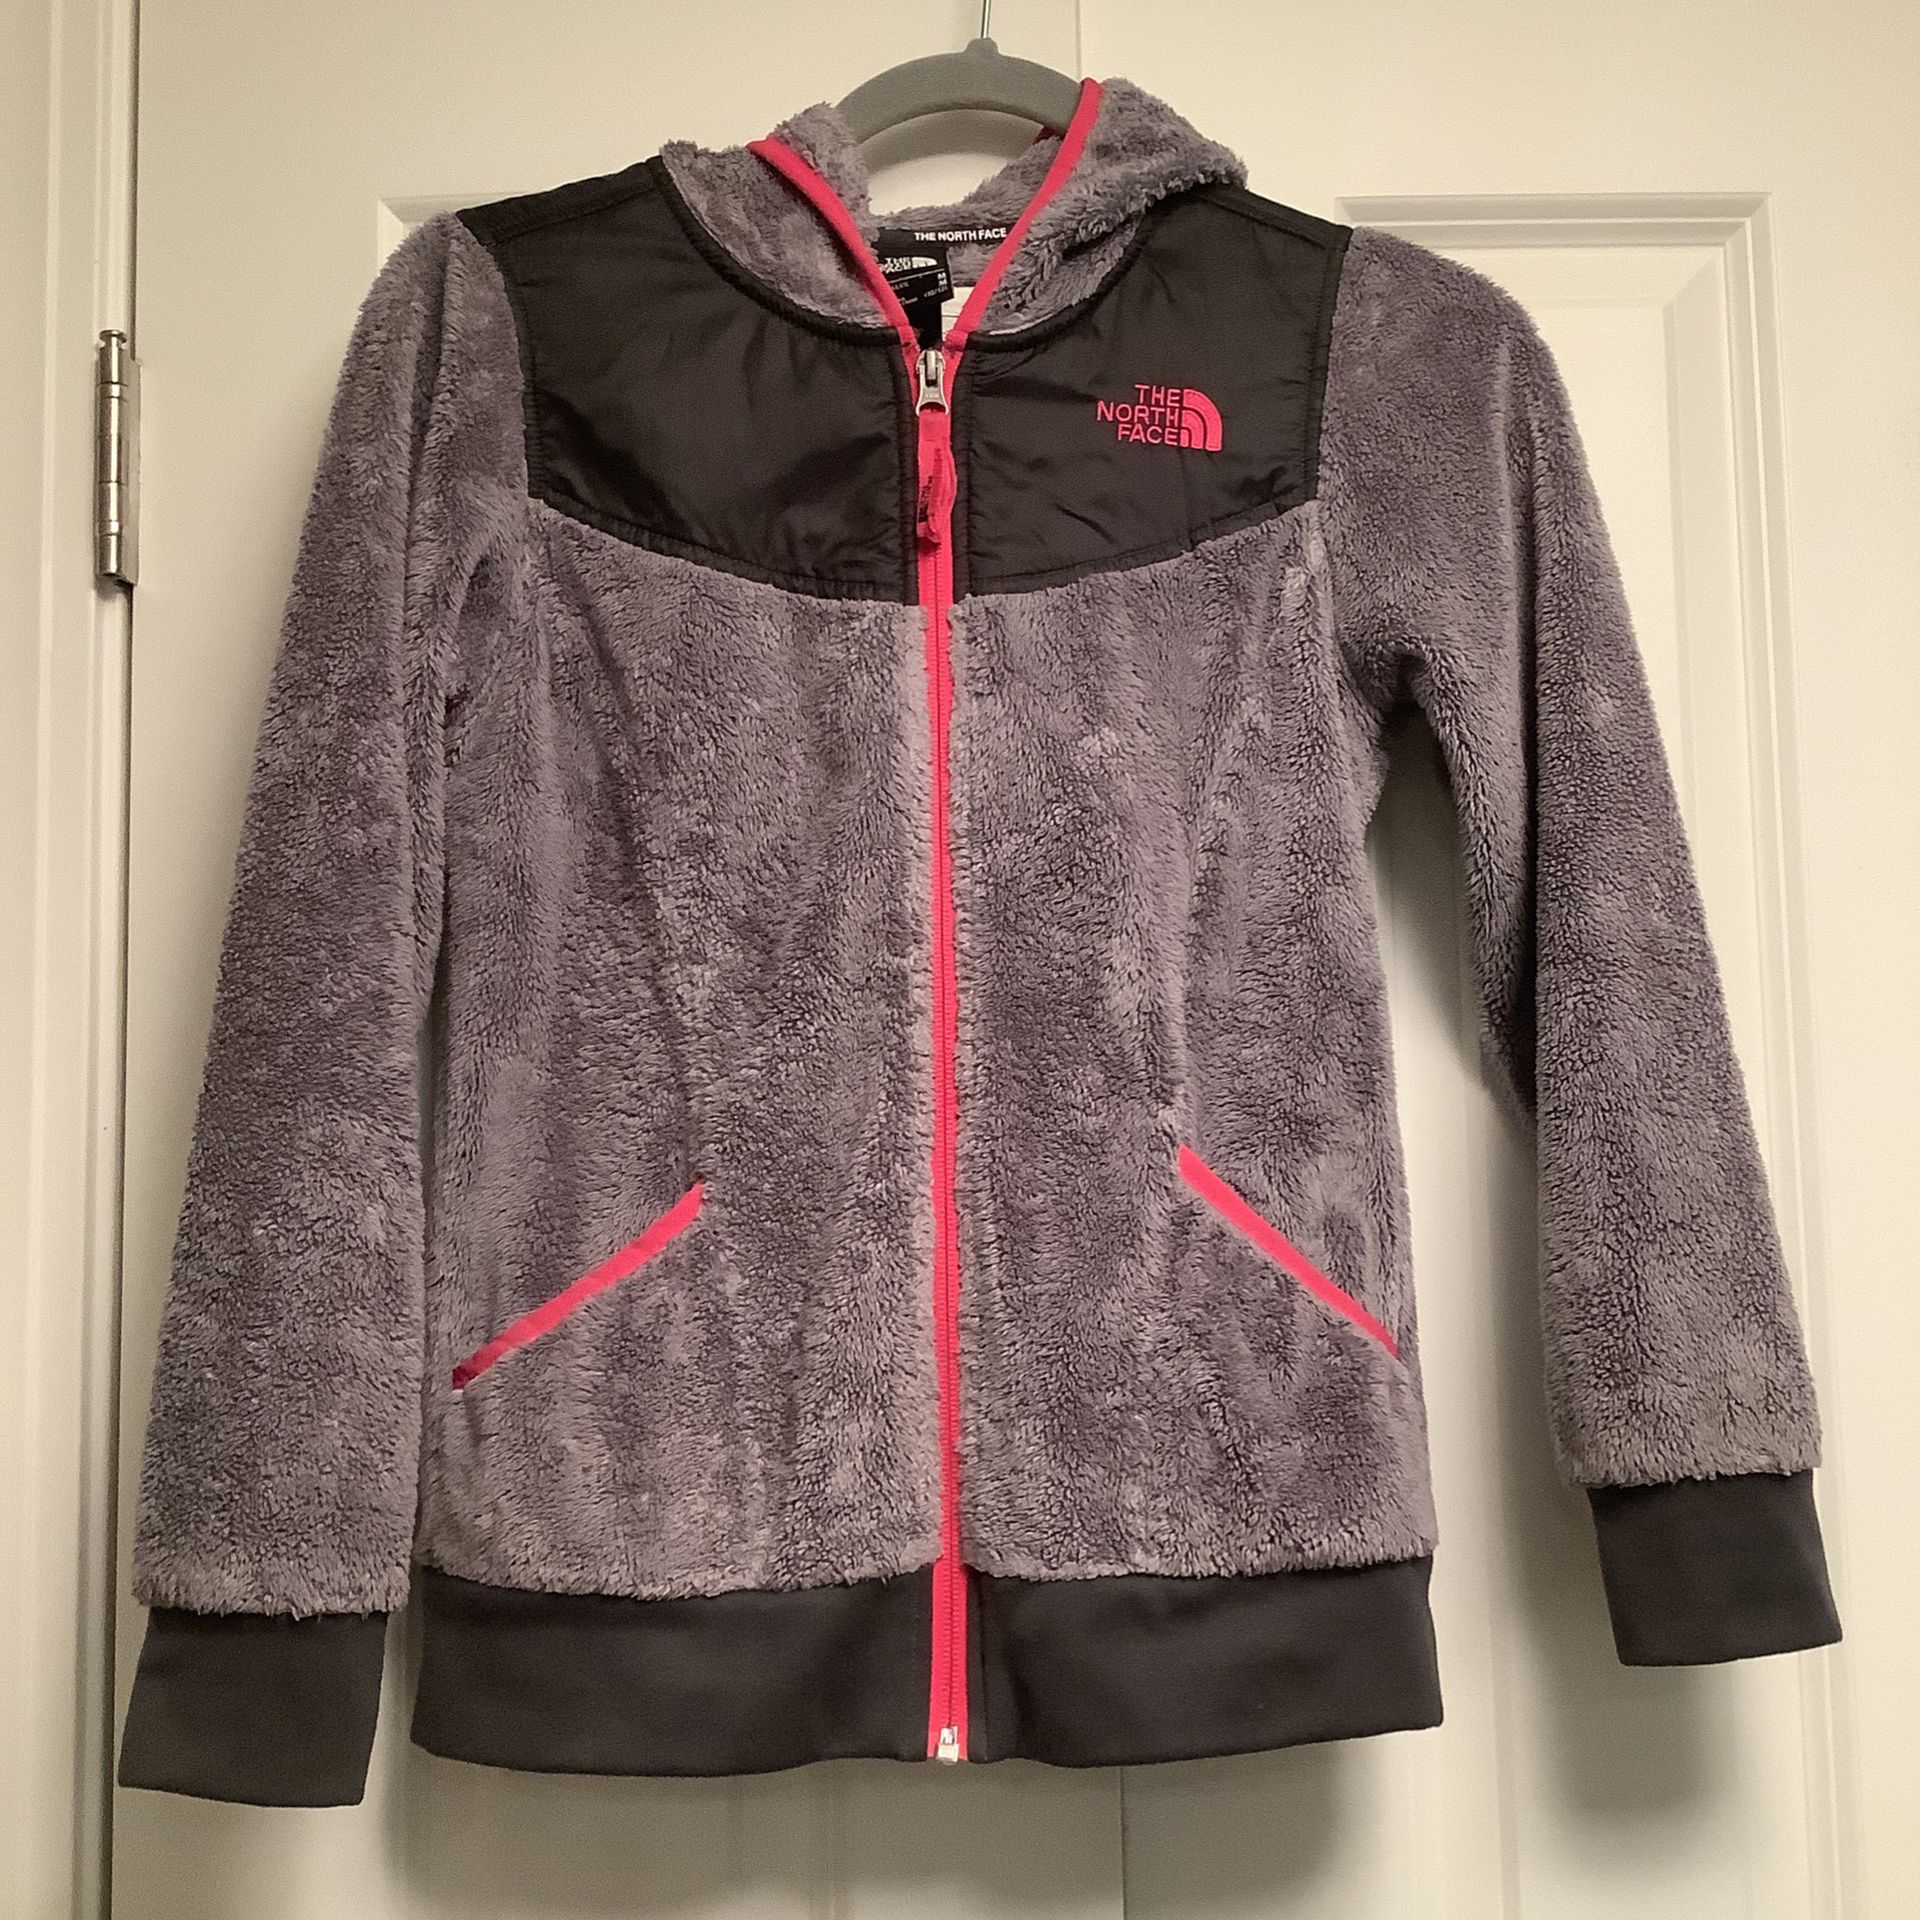 North Face Kids Size M (10/12) Zip-Up Hoodie